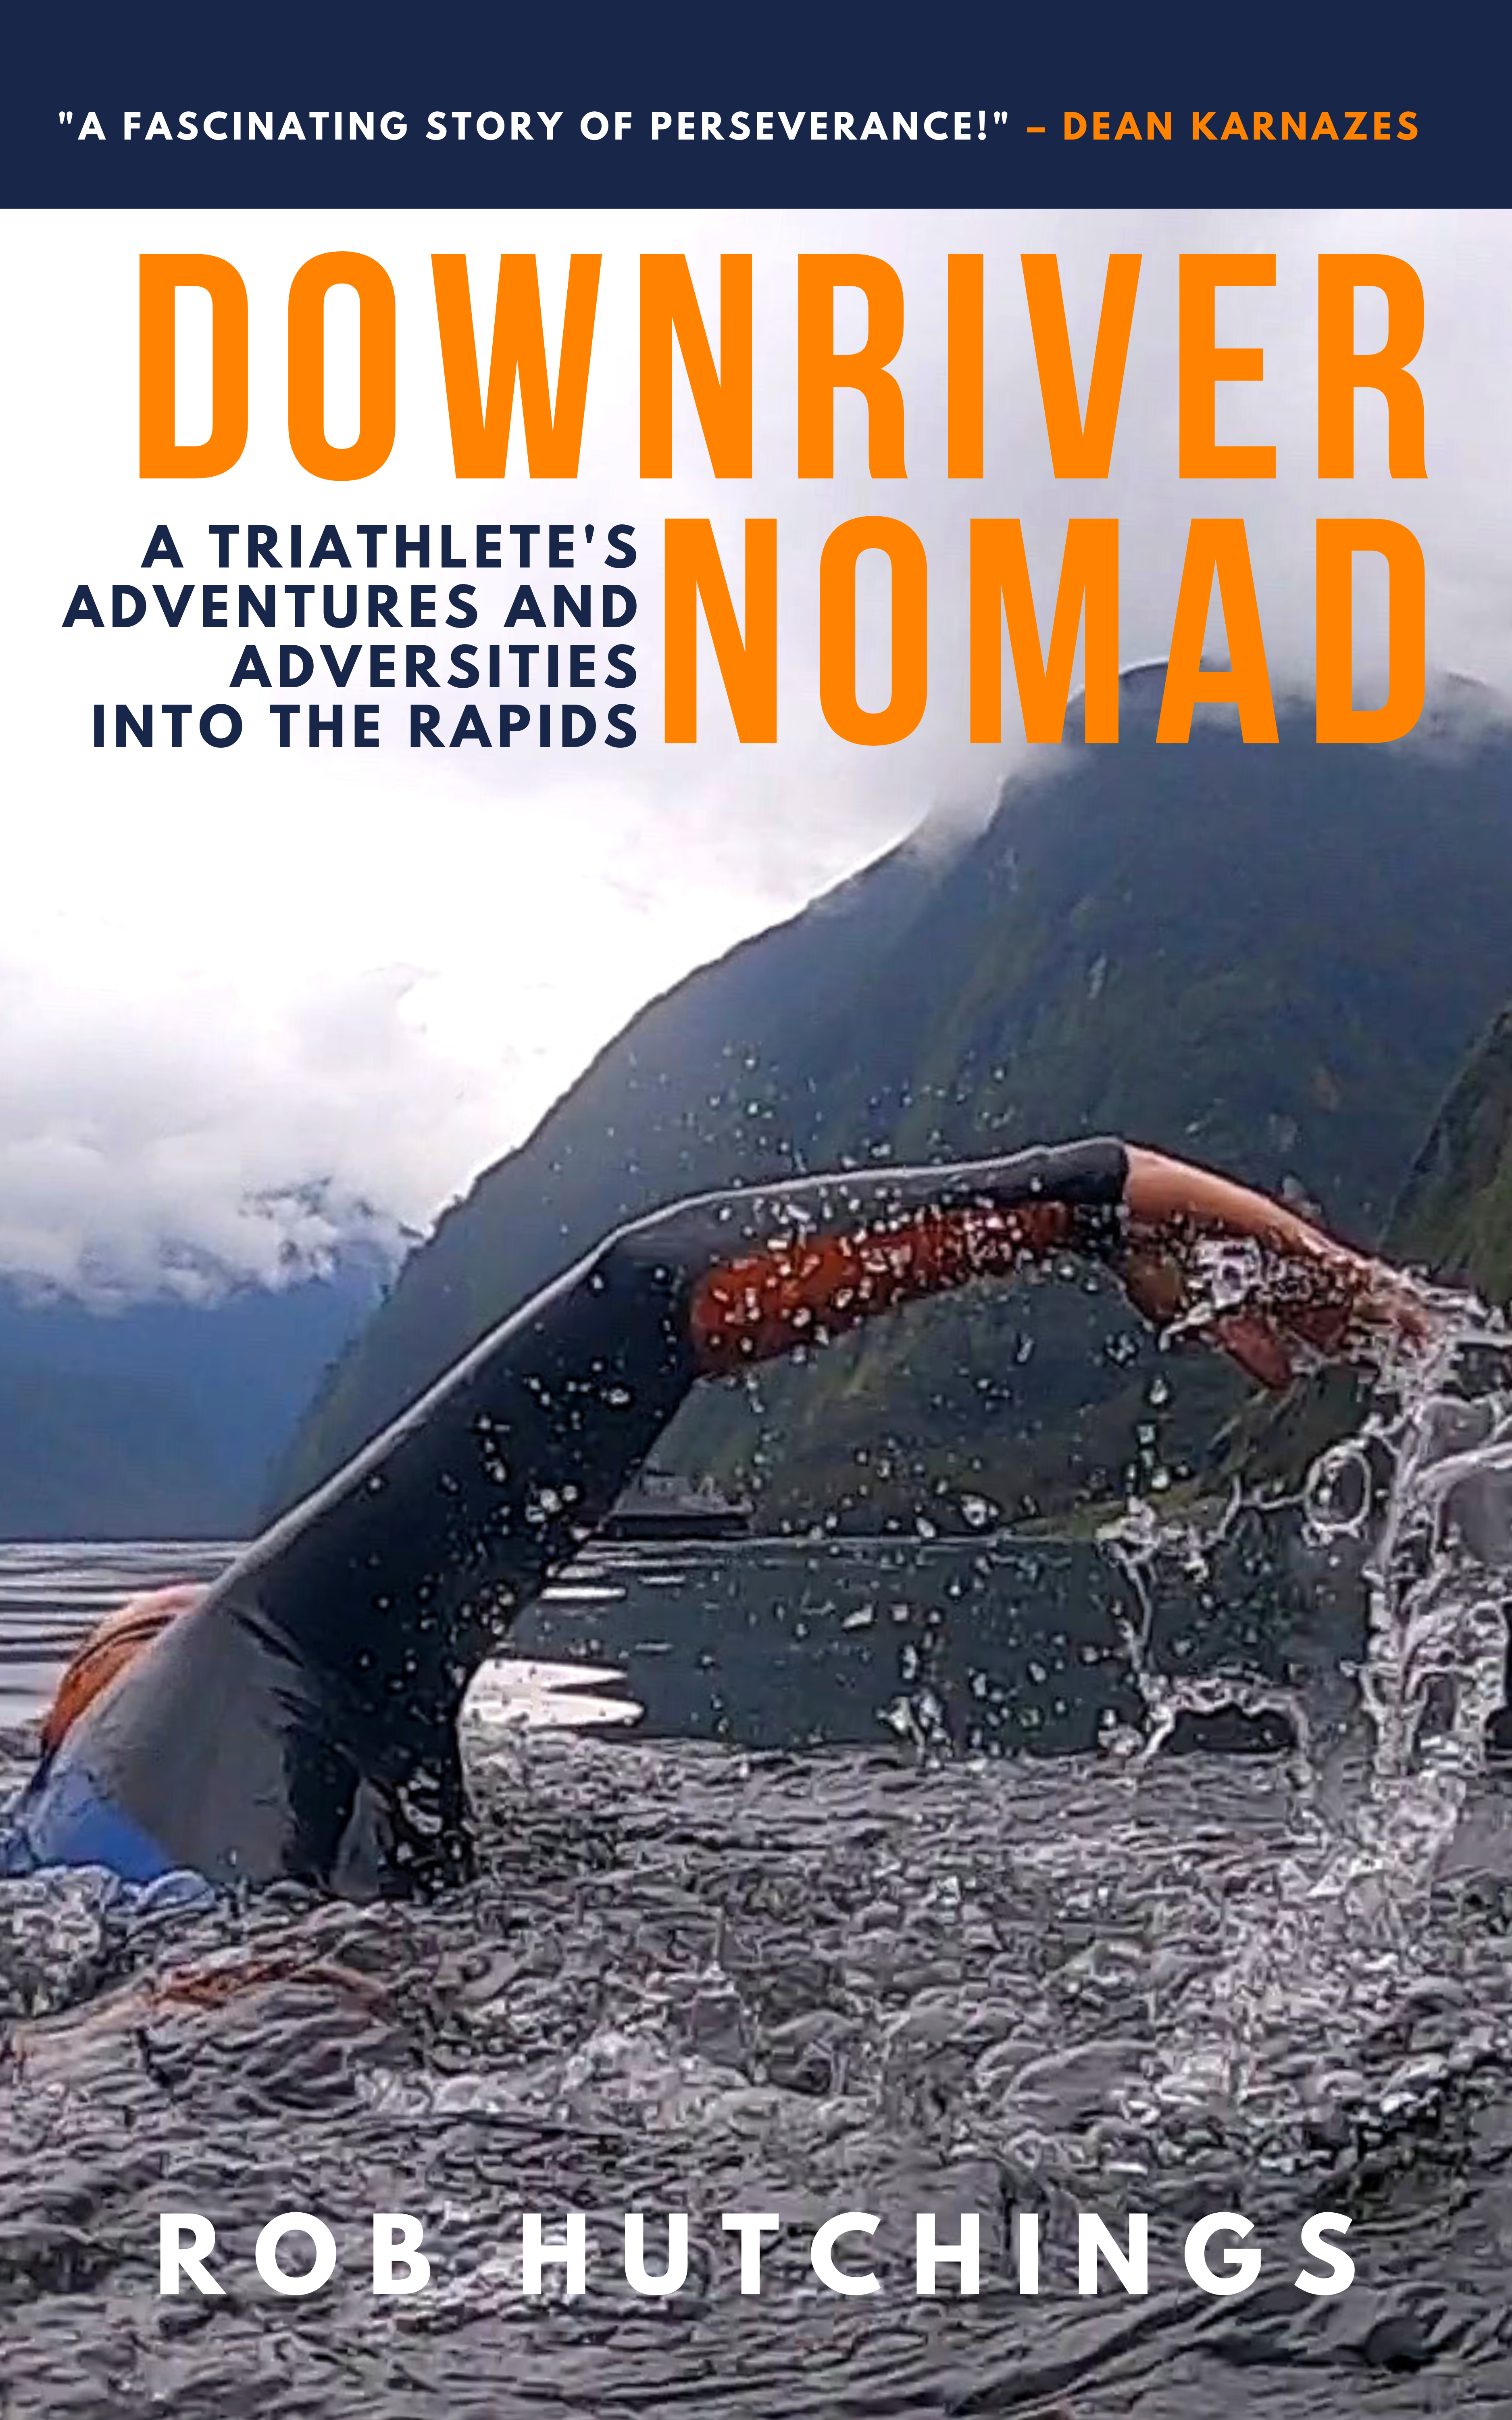 Front cover of book Downriver Nomad